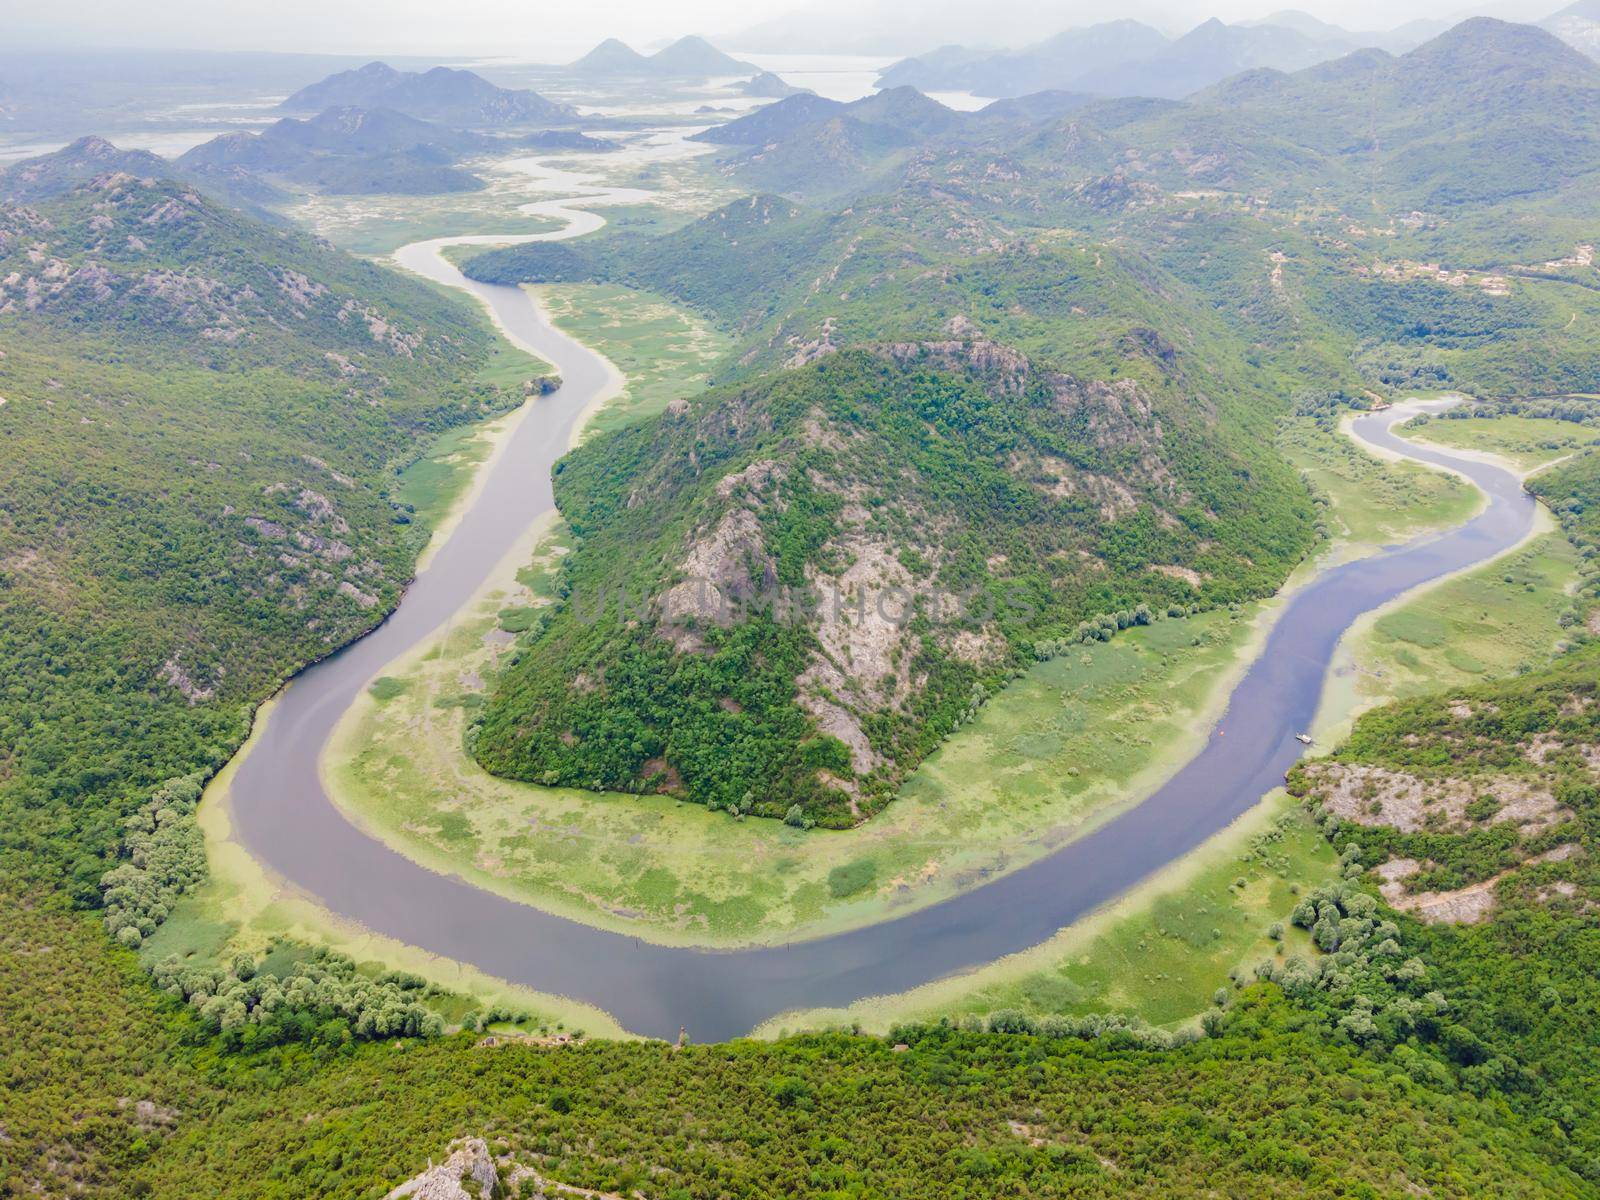 Canyon of Rijeka Crnojevica river near the Skadar lake coast. One of the most famous views of Montenegro. River makes a turn between the mountains and flows backward.